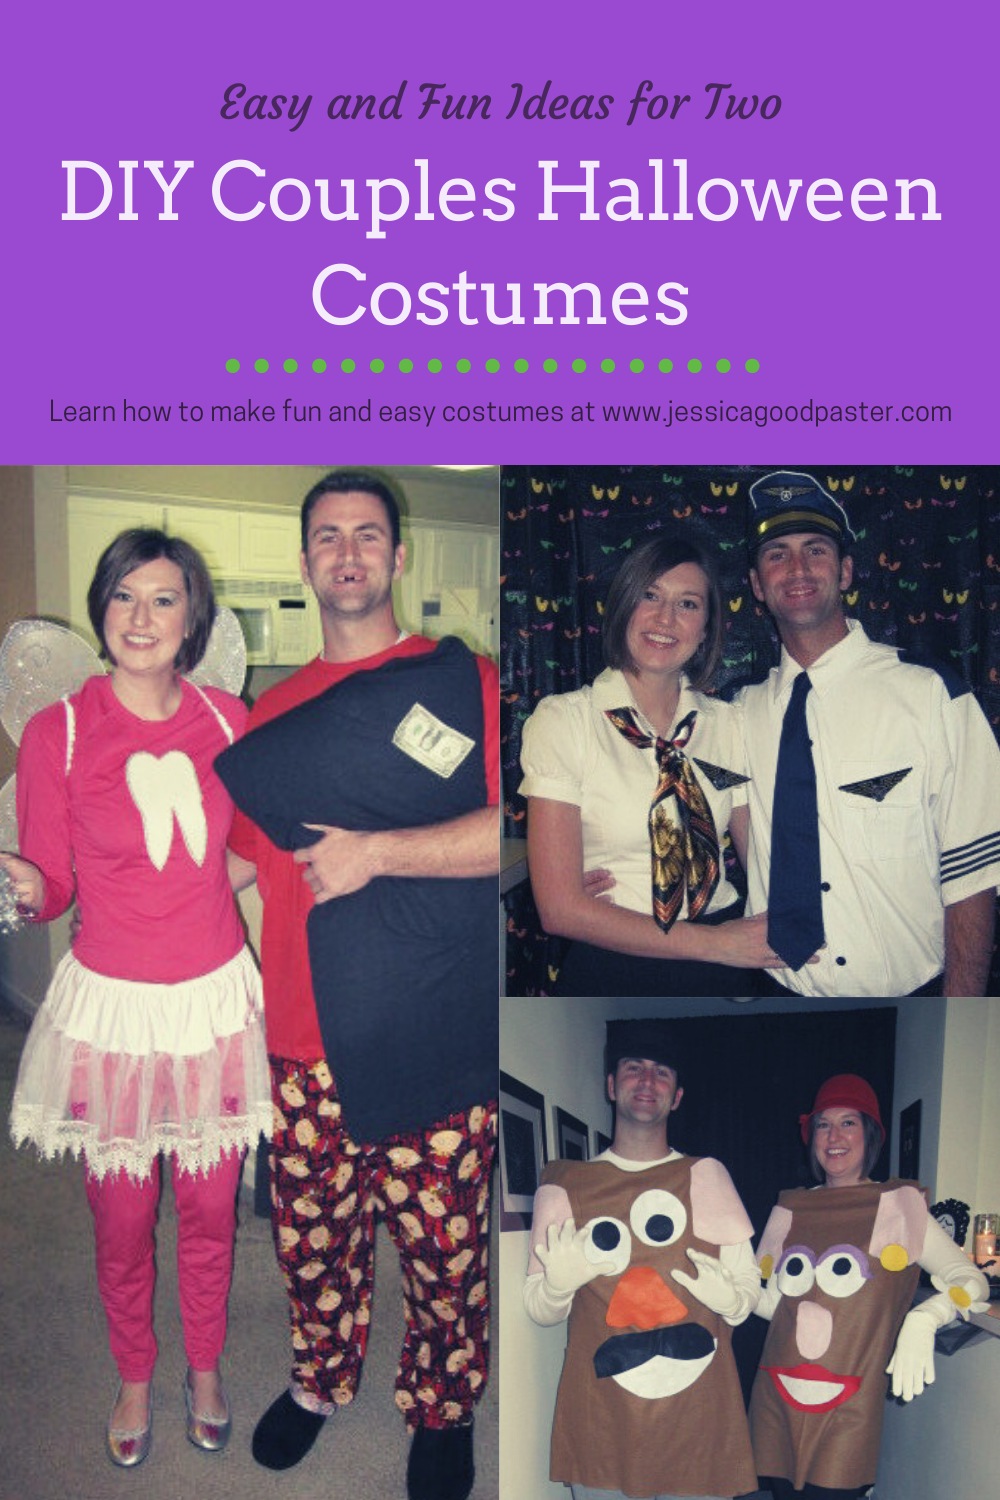 DIY Couple Costumes and 13 Unique Halloween Costume Ideas for You, Your Family, or Group! Find the perfect costume for individuals, couples, families, groups, and kids. Includes some of the best DIY costume ideas as well. #halloween #costumes #halloweencostumes #couplecostumes #groupcostume #diycostumes #familycostume #trunkortreat